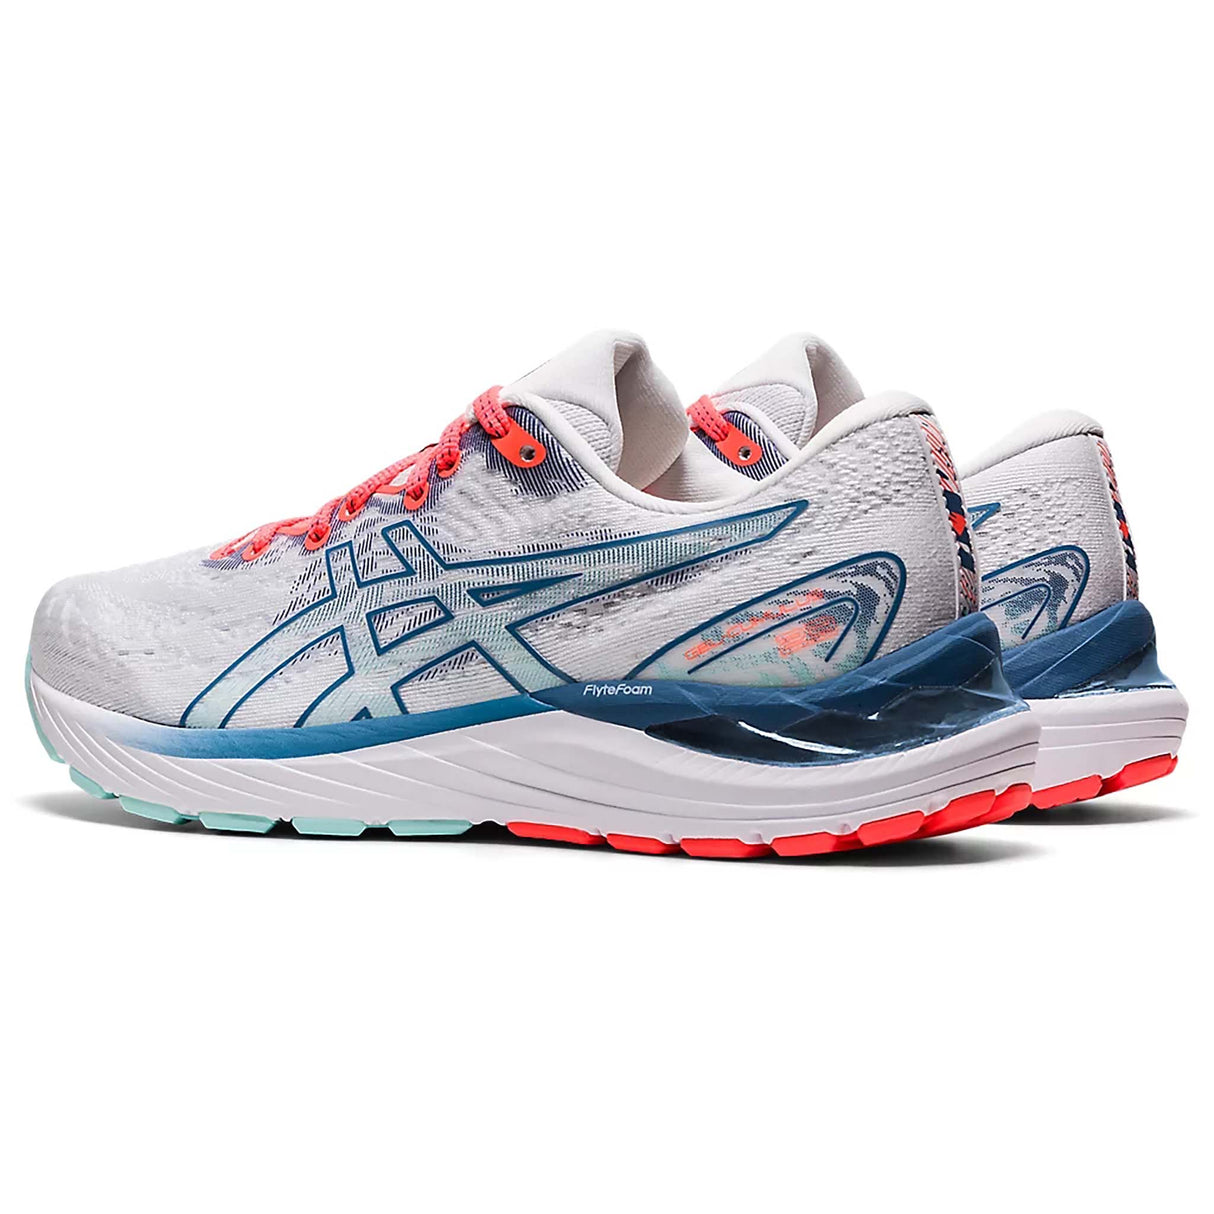 Asics Gel Cumulus 23 running femme white grey floss paire lateral